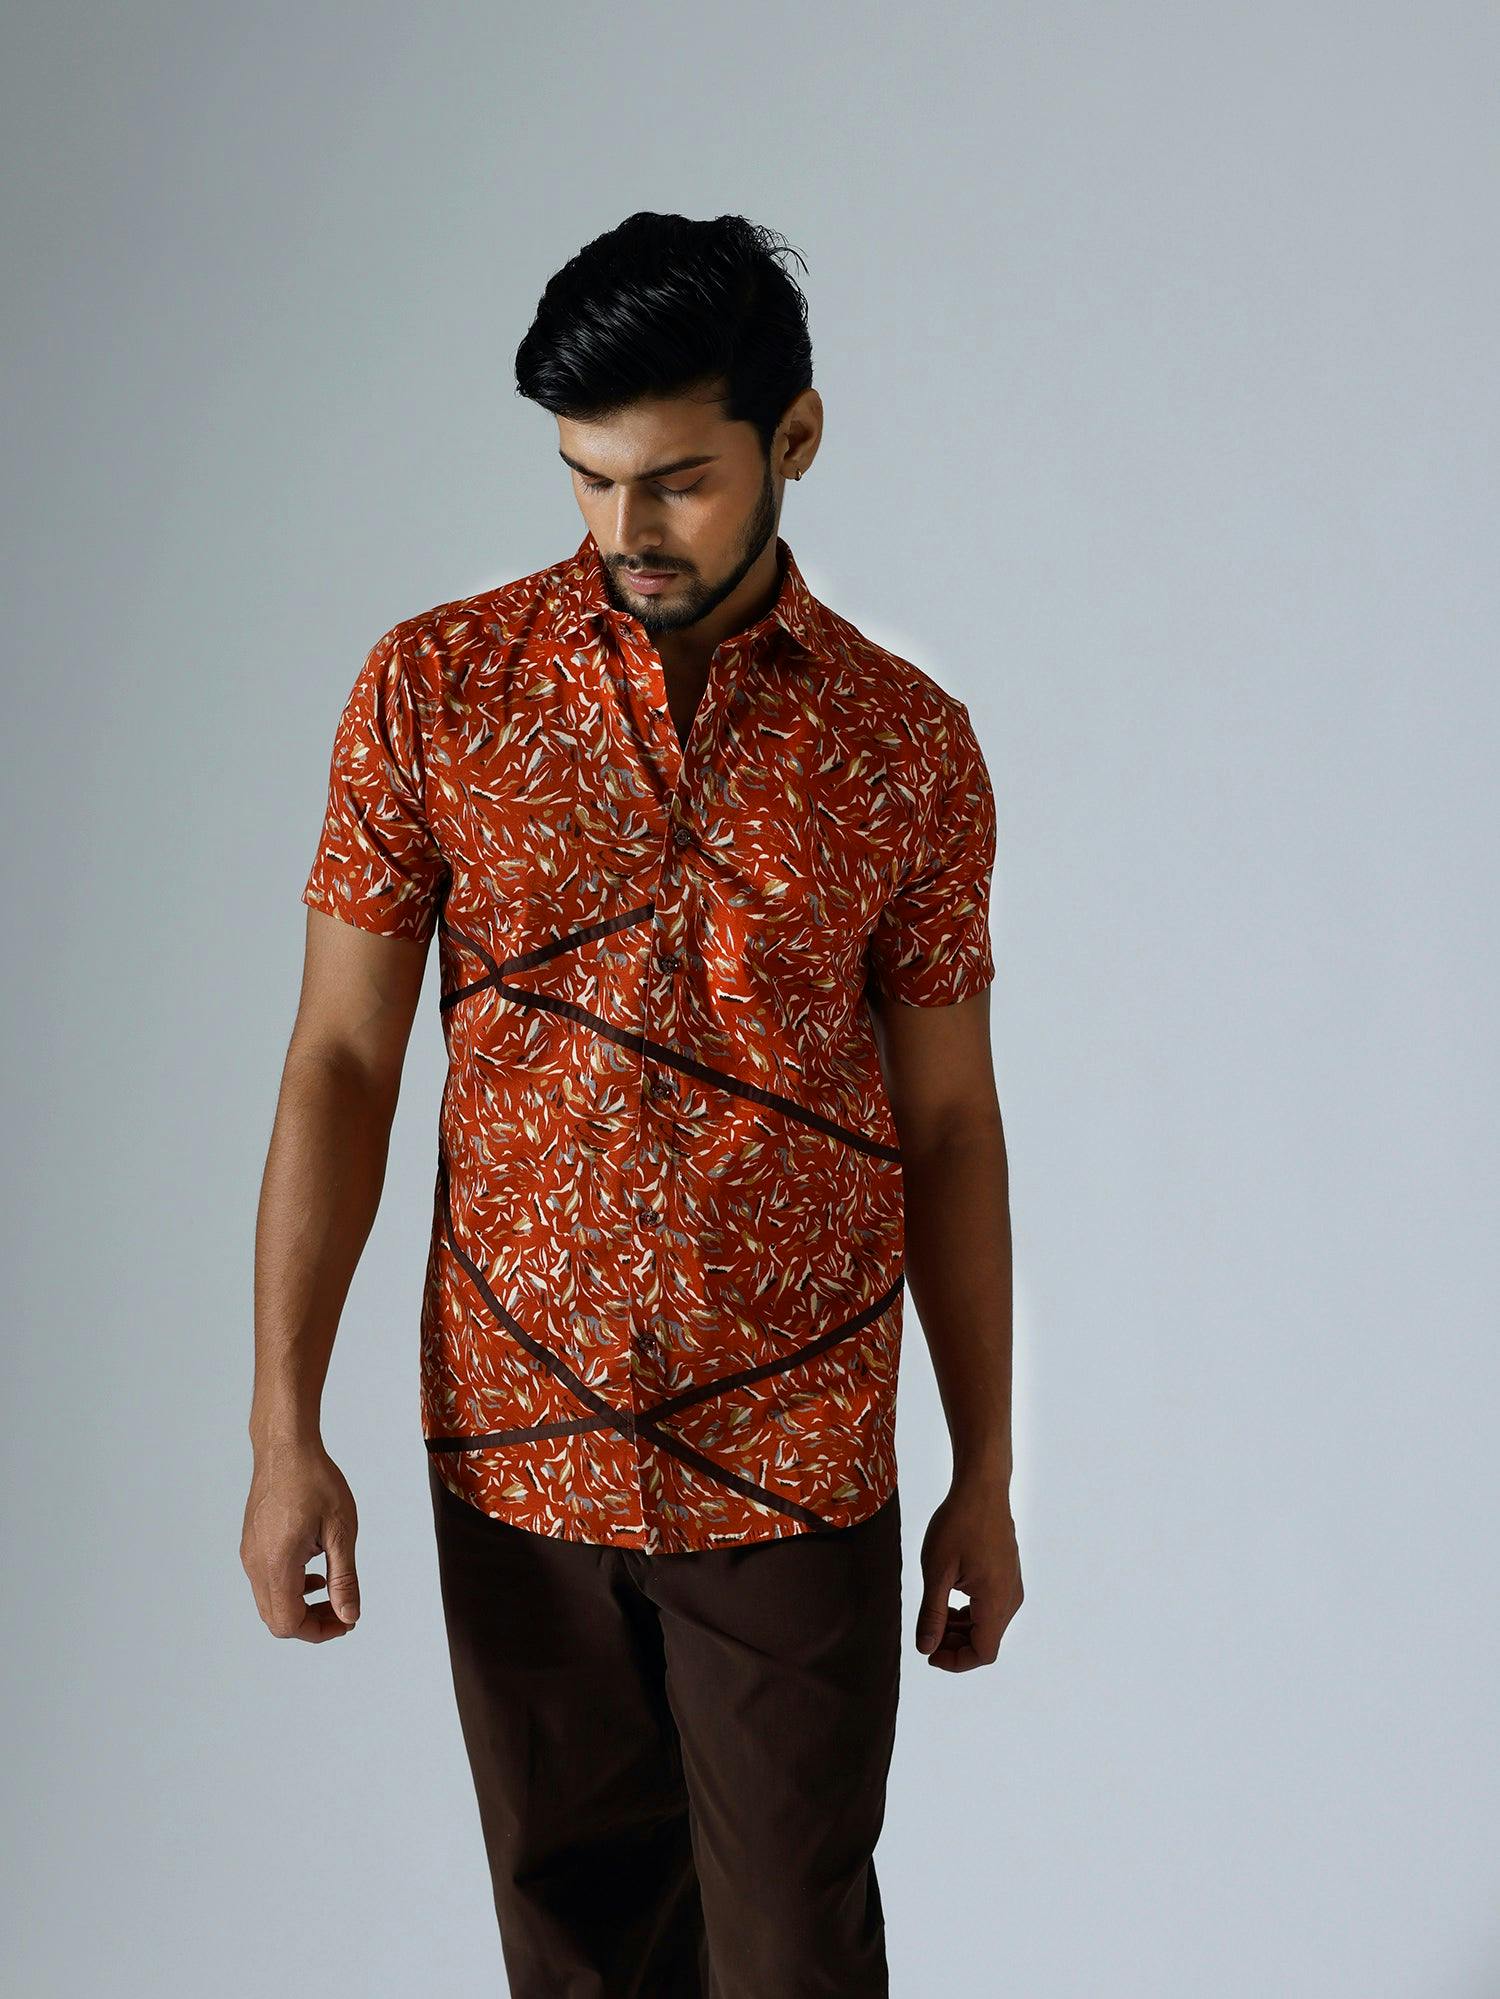 Waves Red Half sleeves Shirt, a product by KLAD